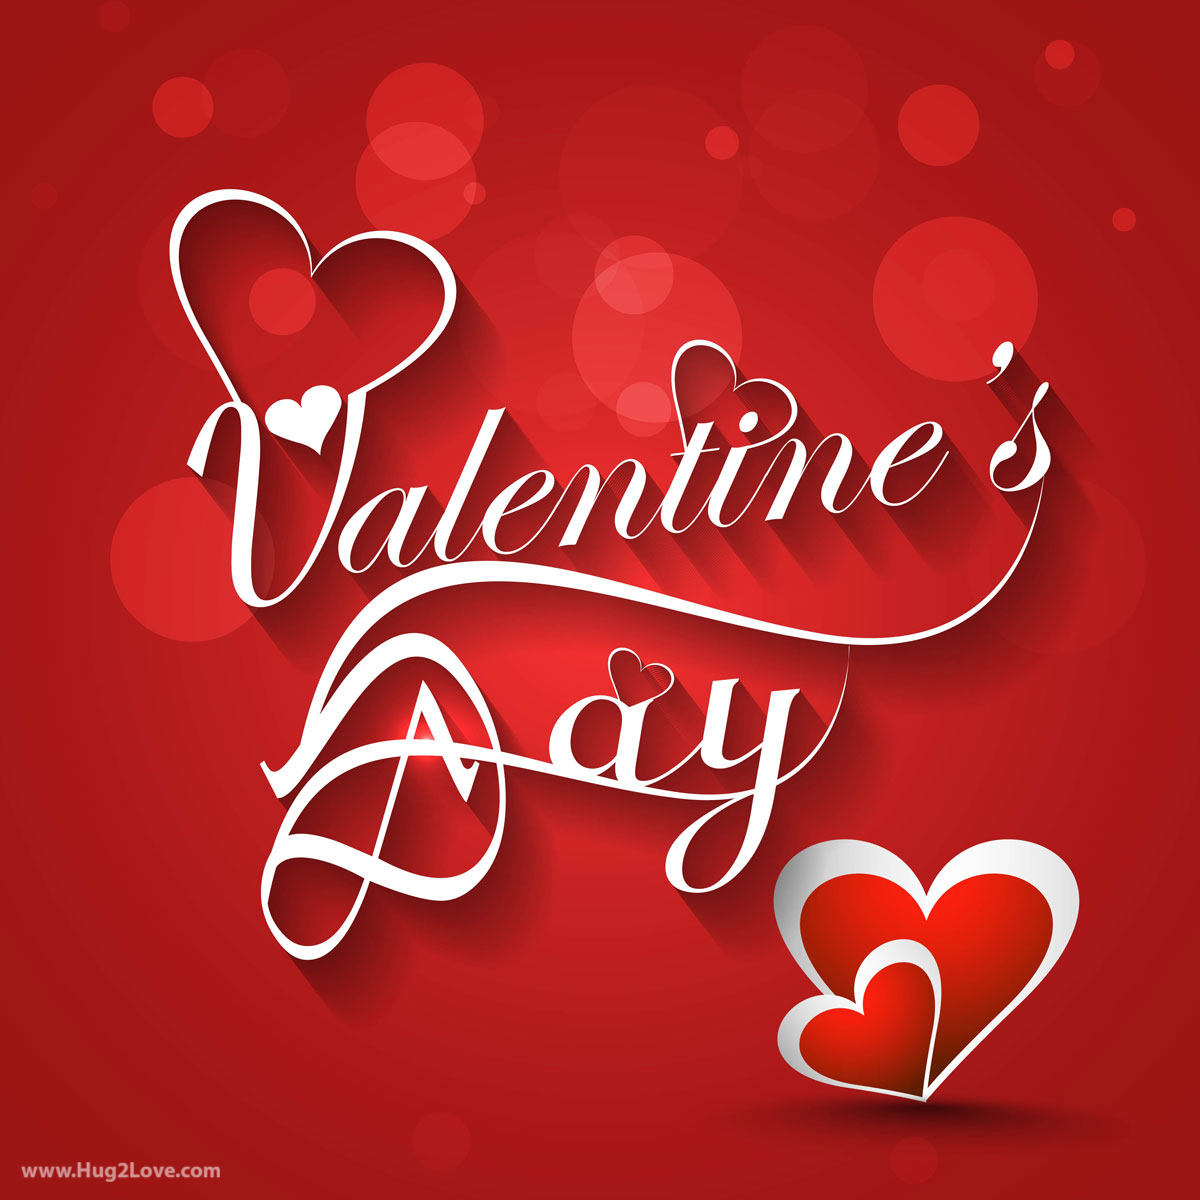 Free Hd Valentine Love Images - Romantic Valentine Day 2019 , HD Wallpaper & Backgrounds